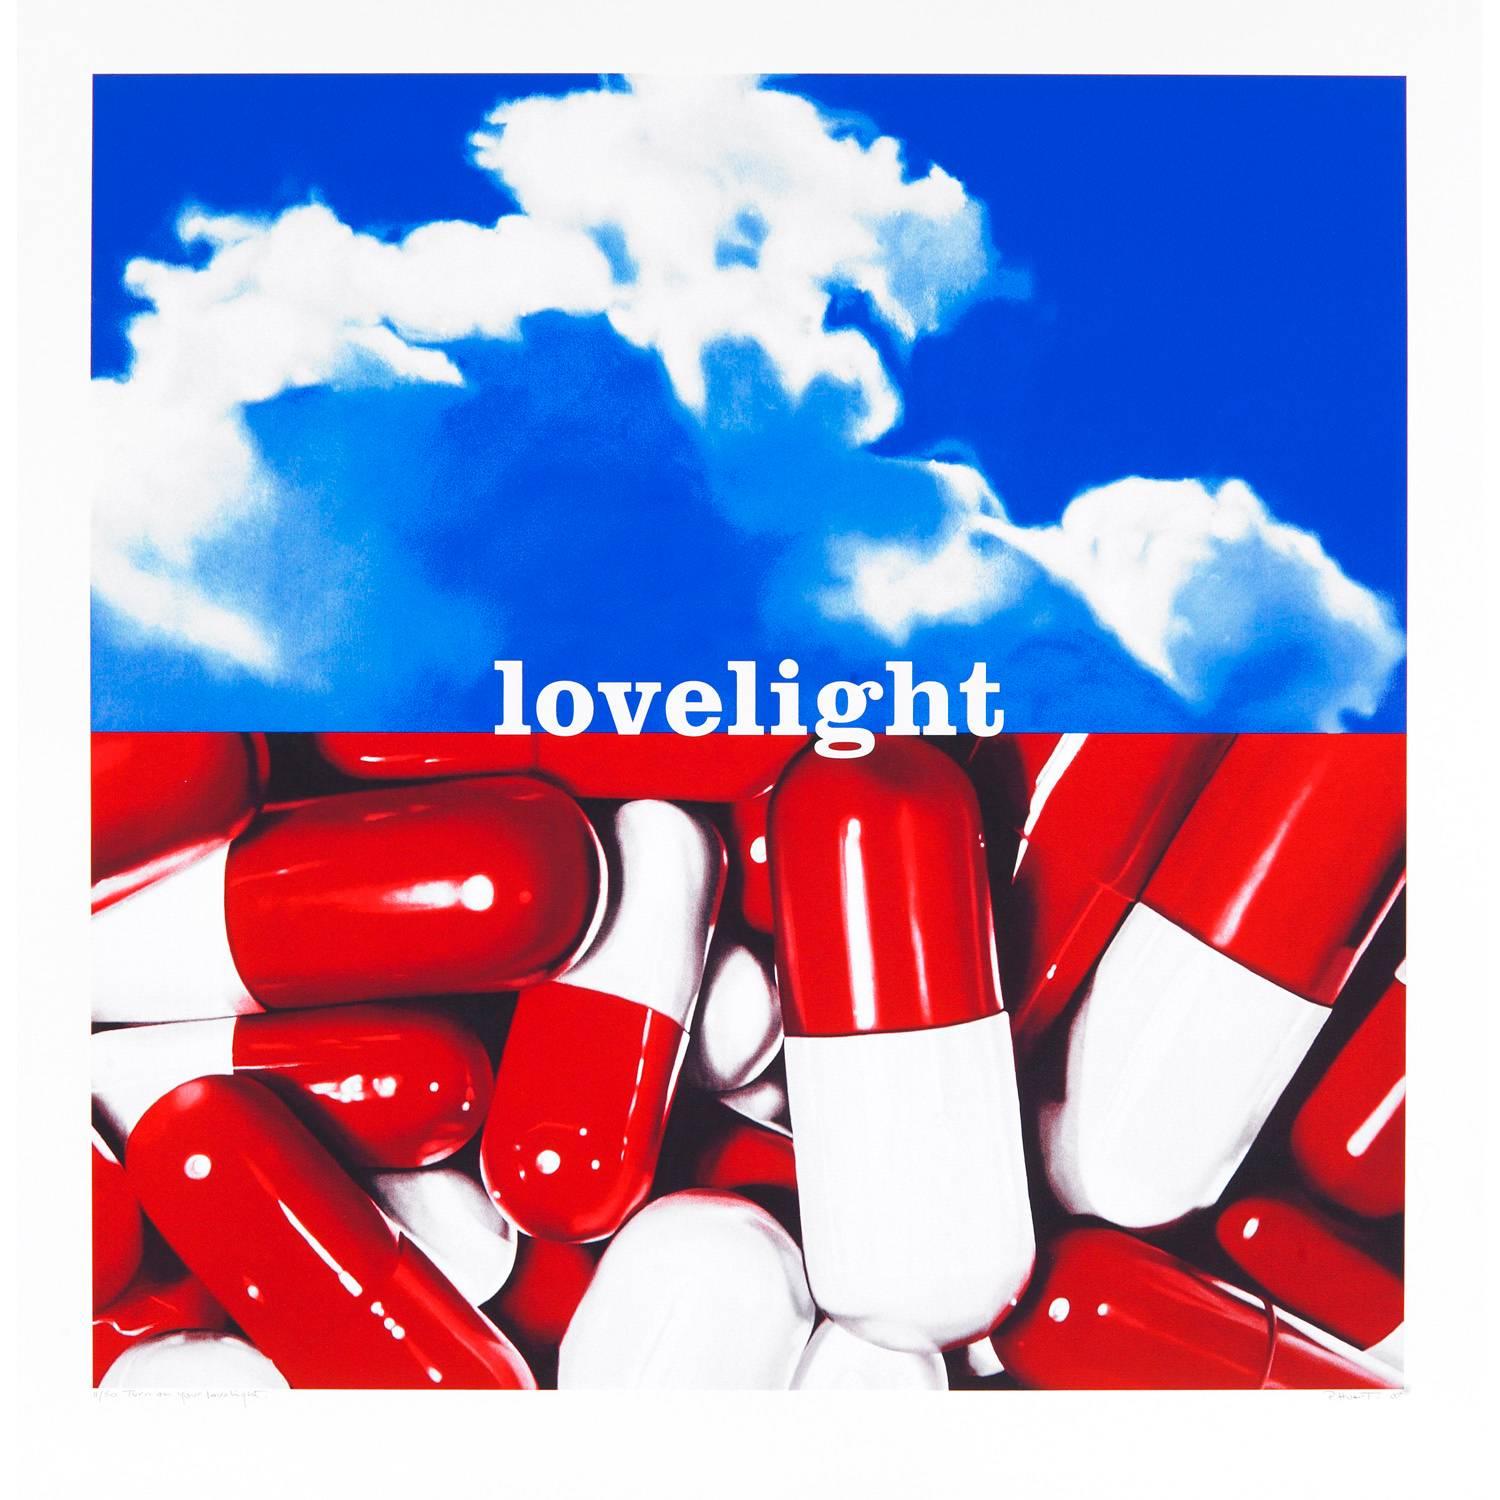 Turn on Your Lovelight - Print by Philippe Huart